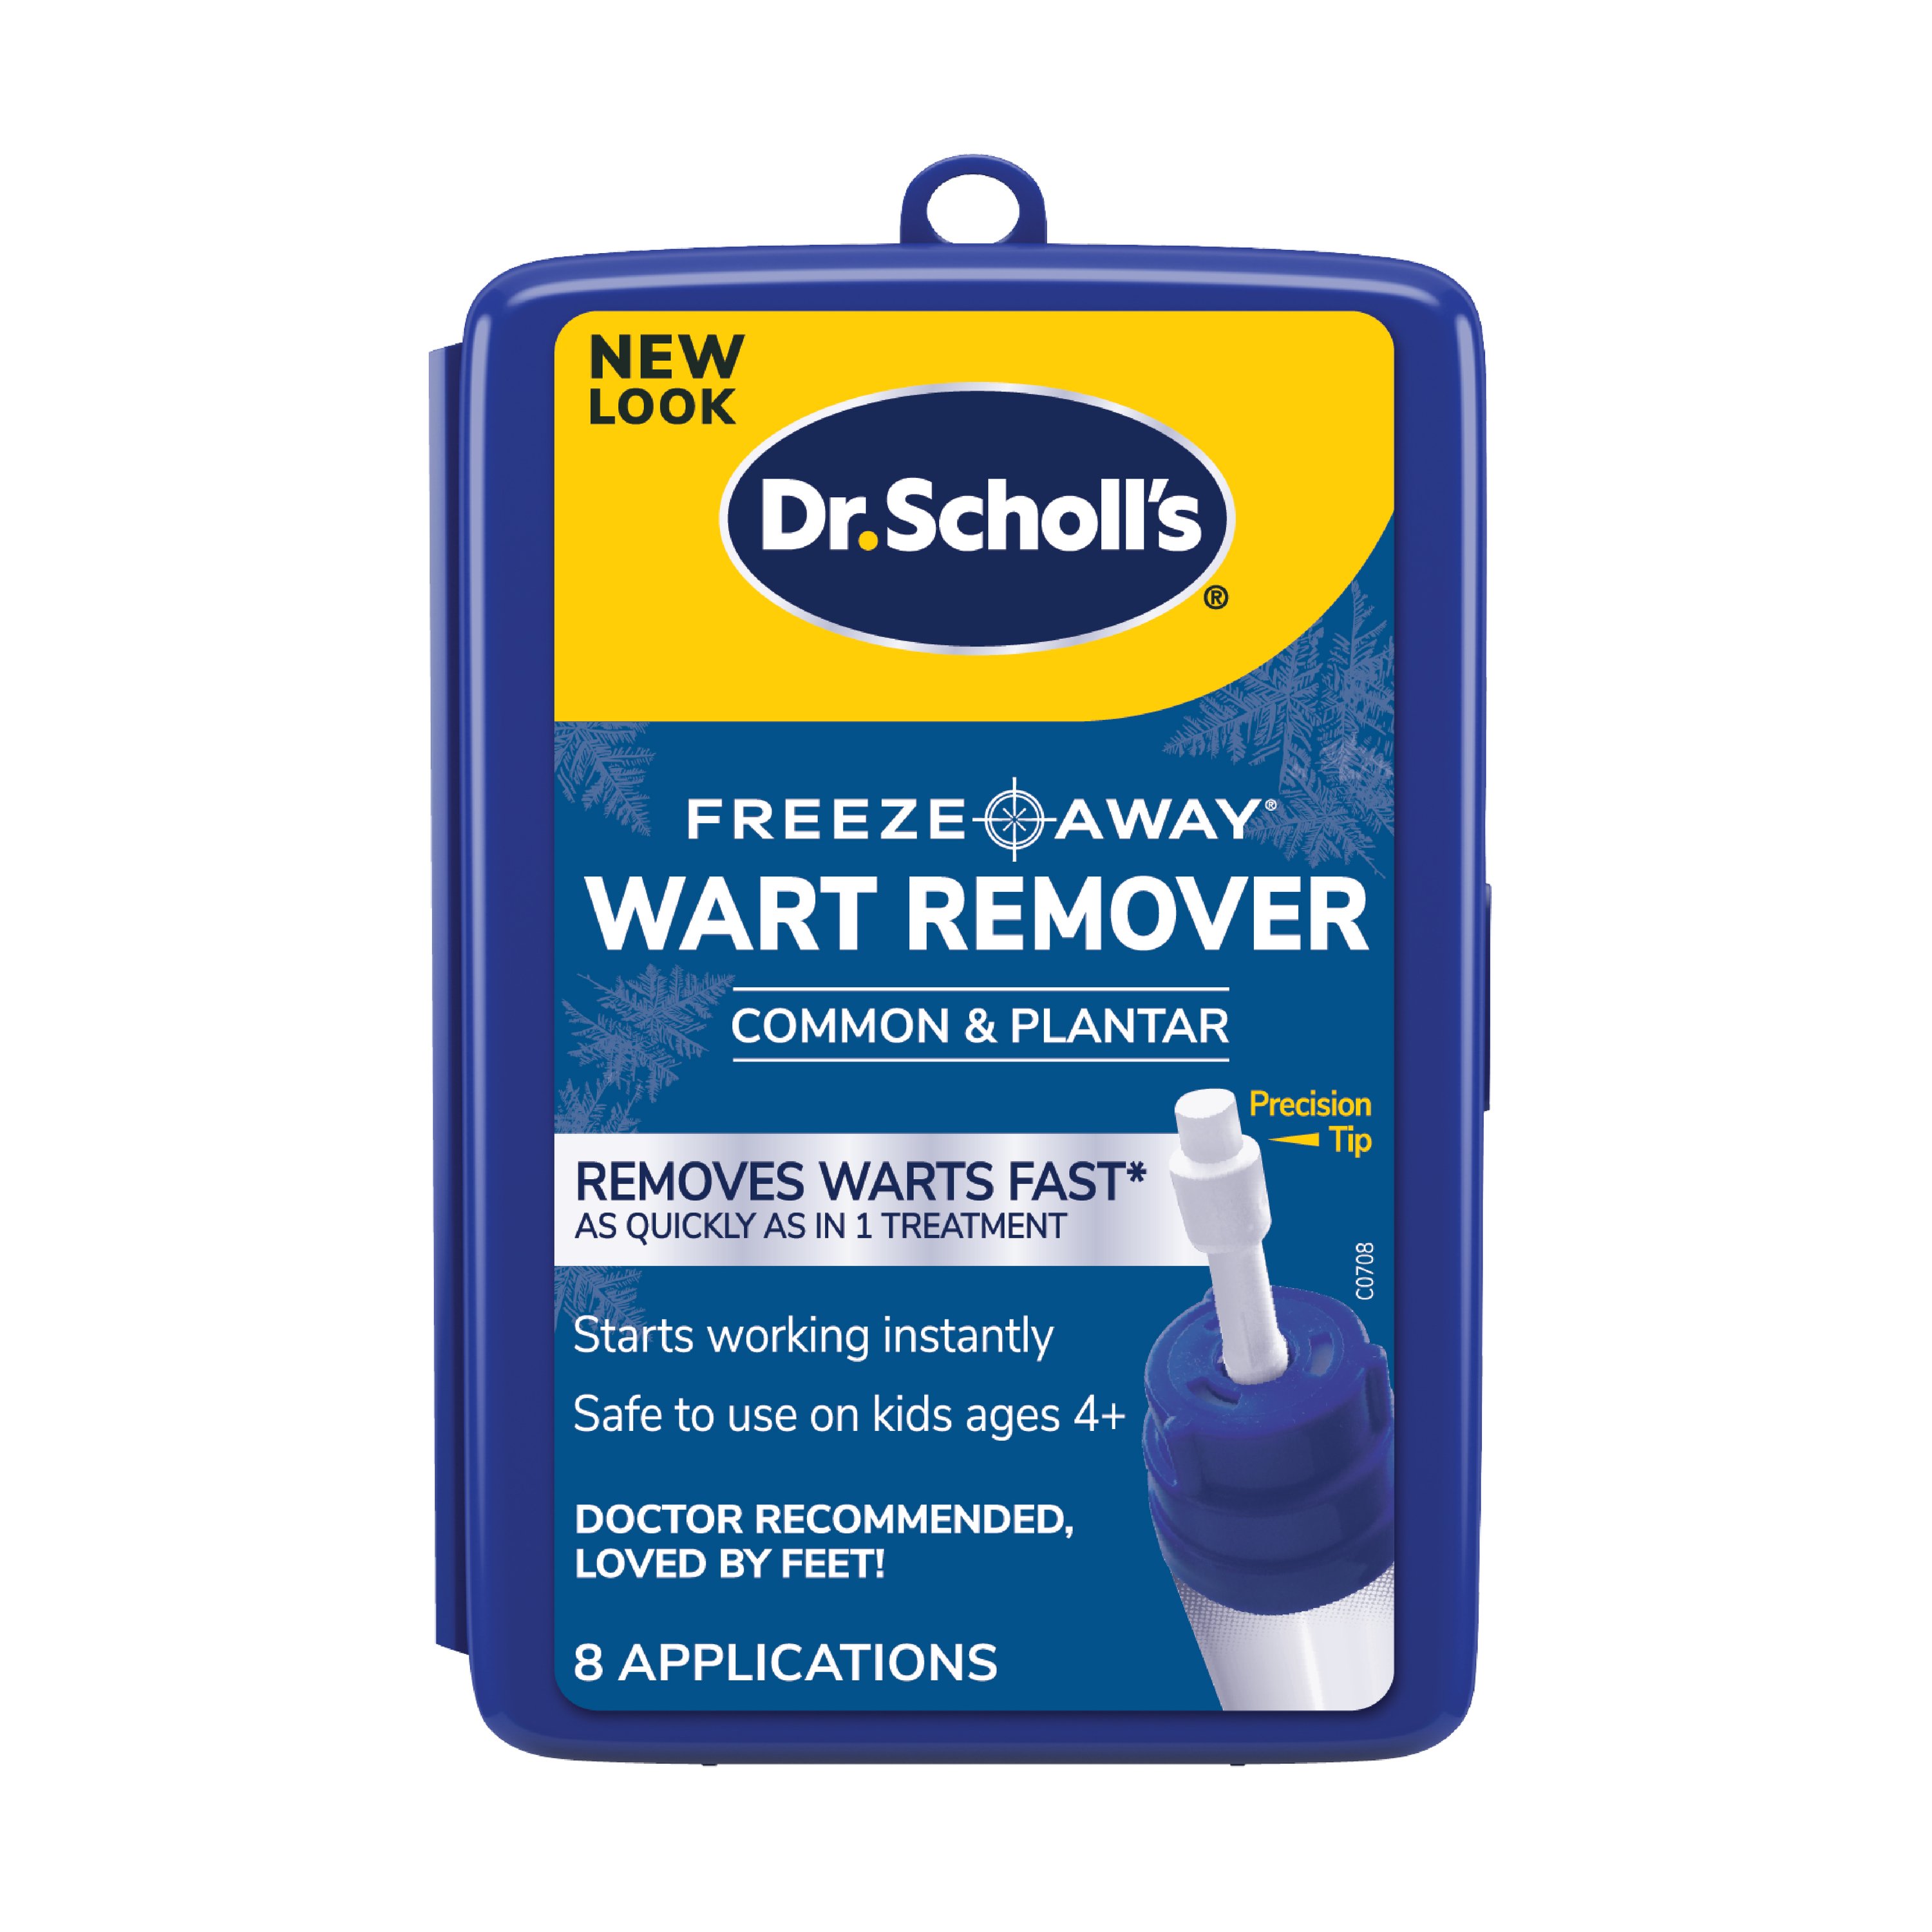 Compound W® Freeze Off® Dimethyl Ether / Propane Wart Remover – Medical  Supply HQ